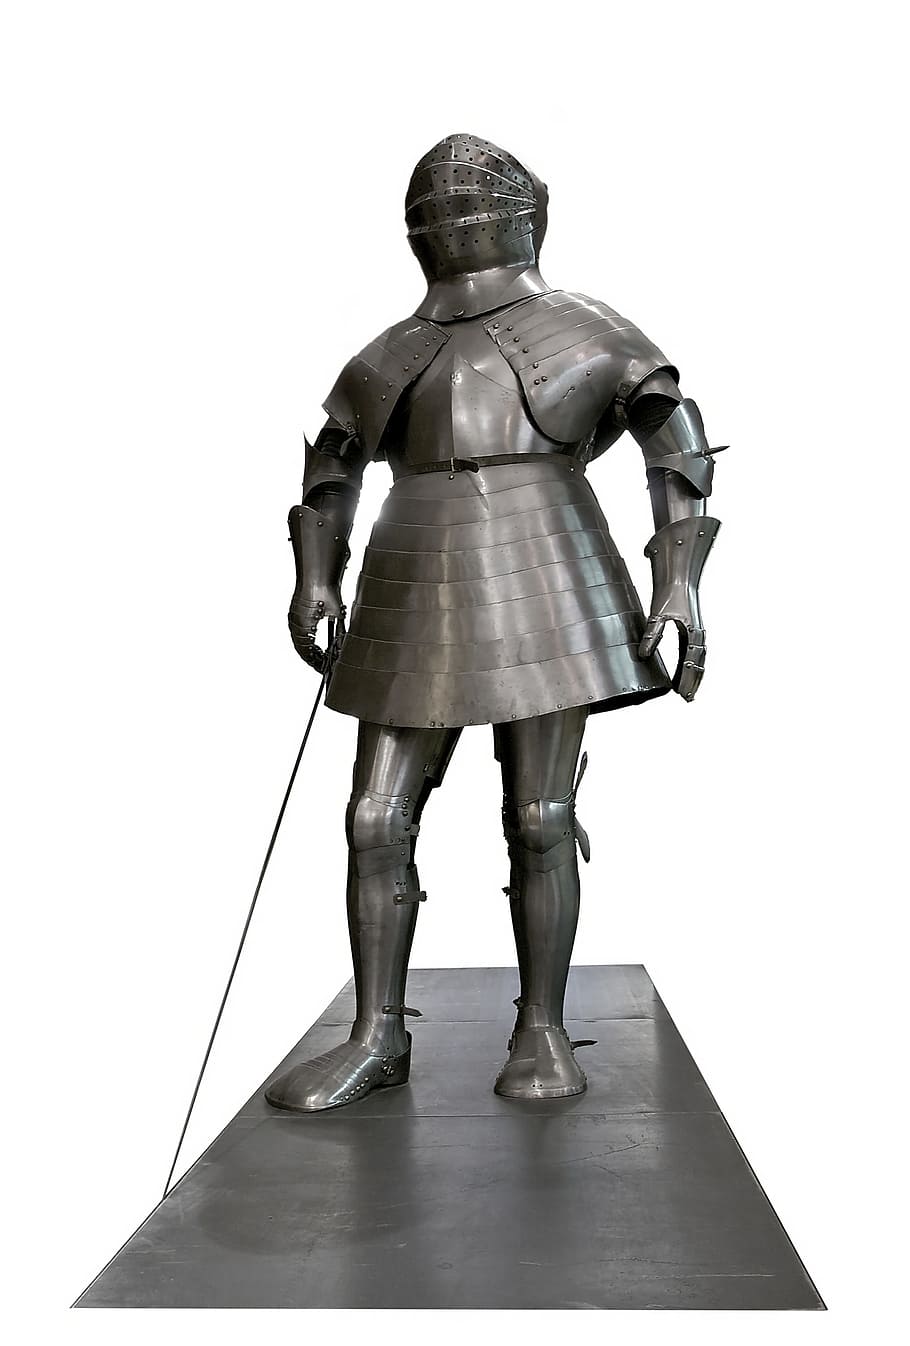 armour, knight, historic, museum, medieval, warrior, metal, protection, iron, ancient